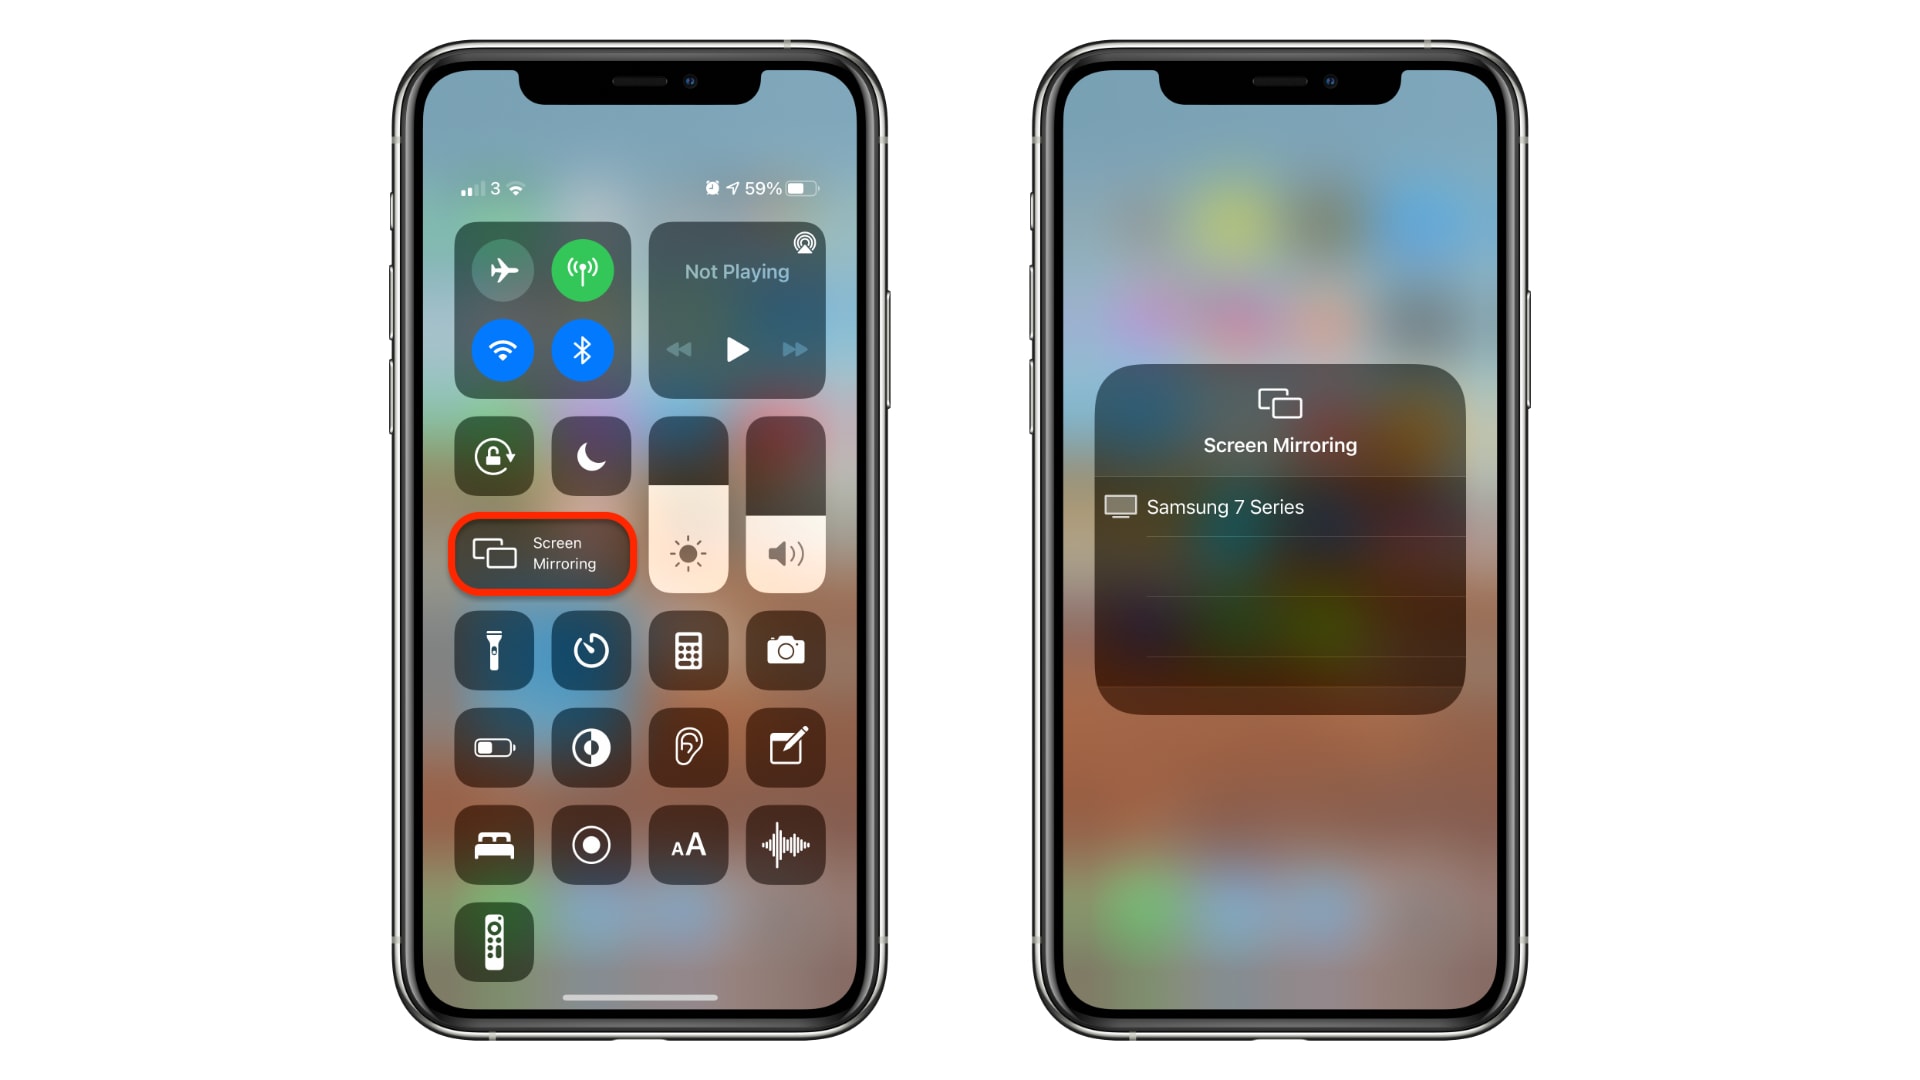 How to start screen mirroring with Control Center